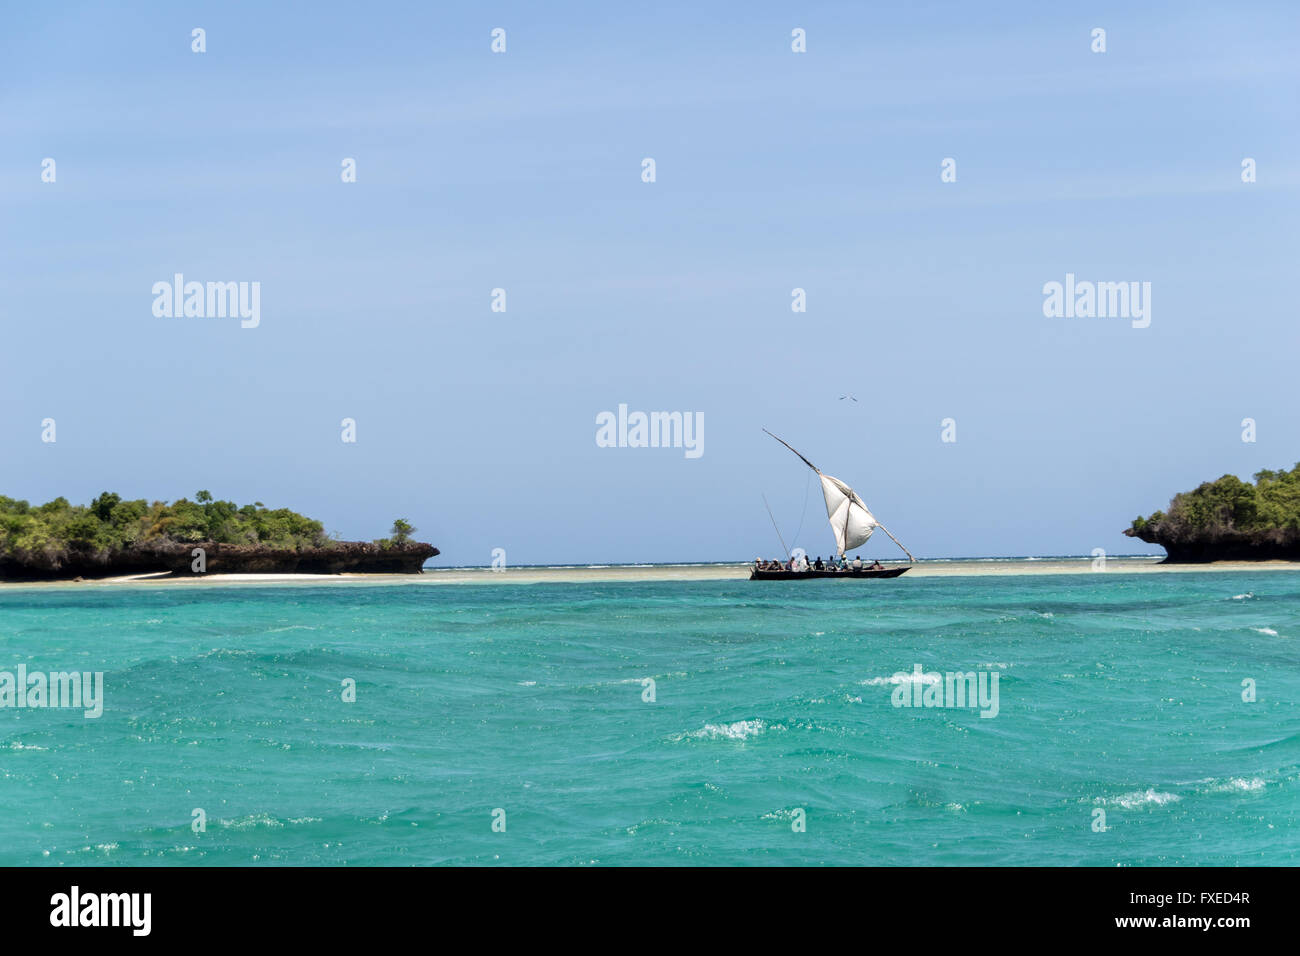 Local wooden boat sailing the Indian Ocean off the coast of Tanzania Stock Photo